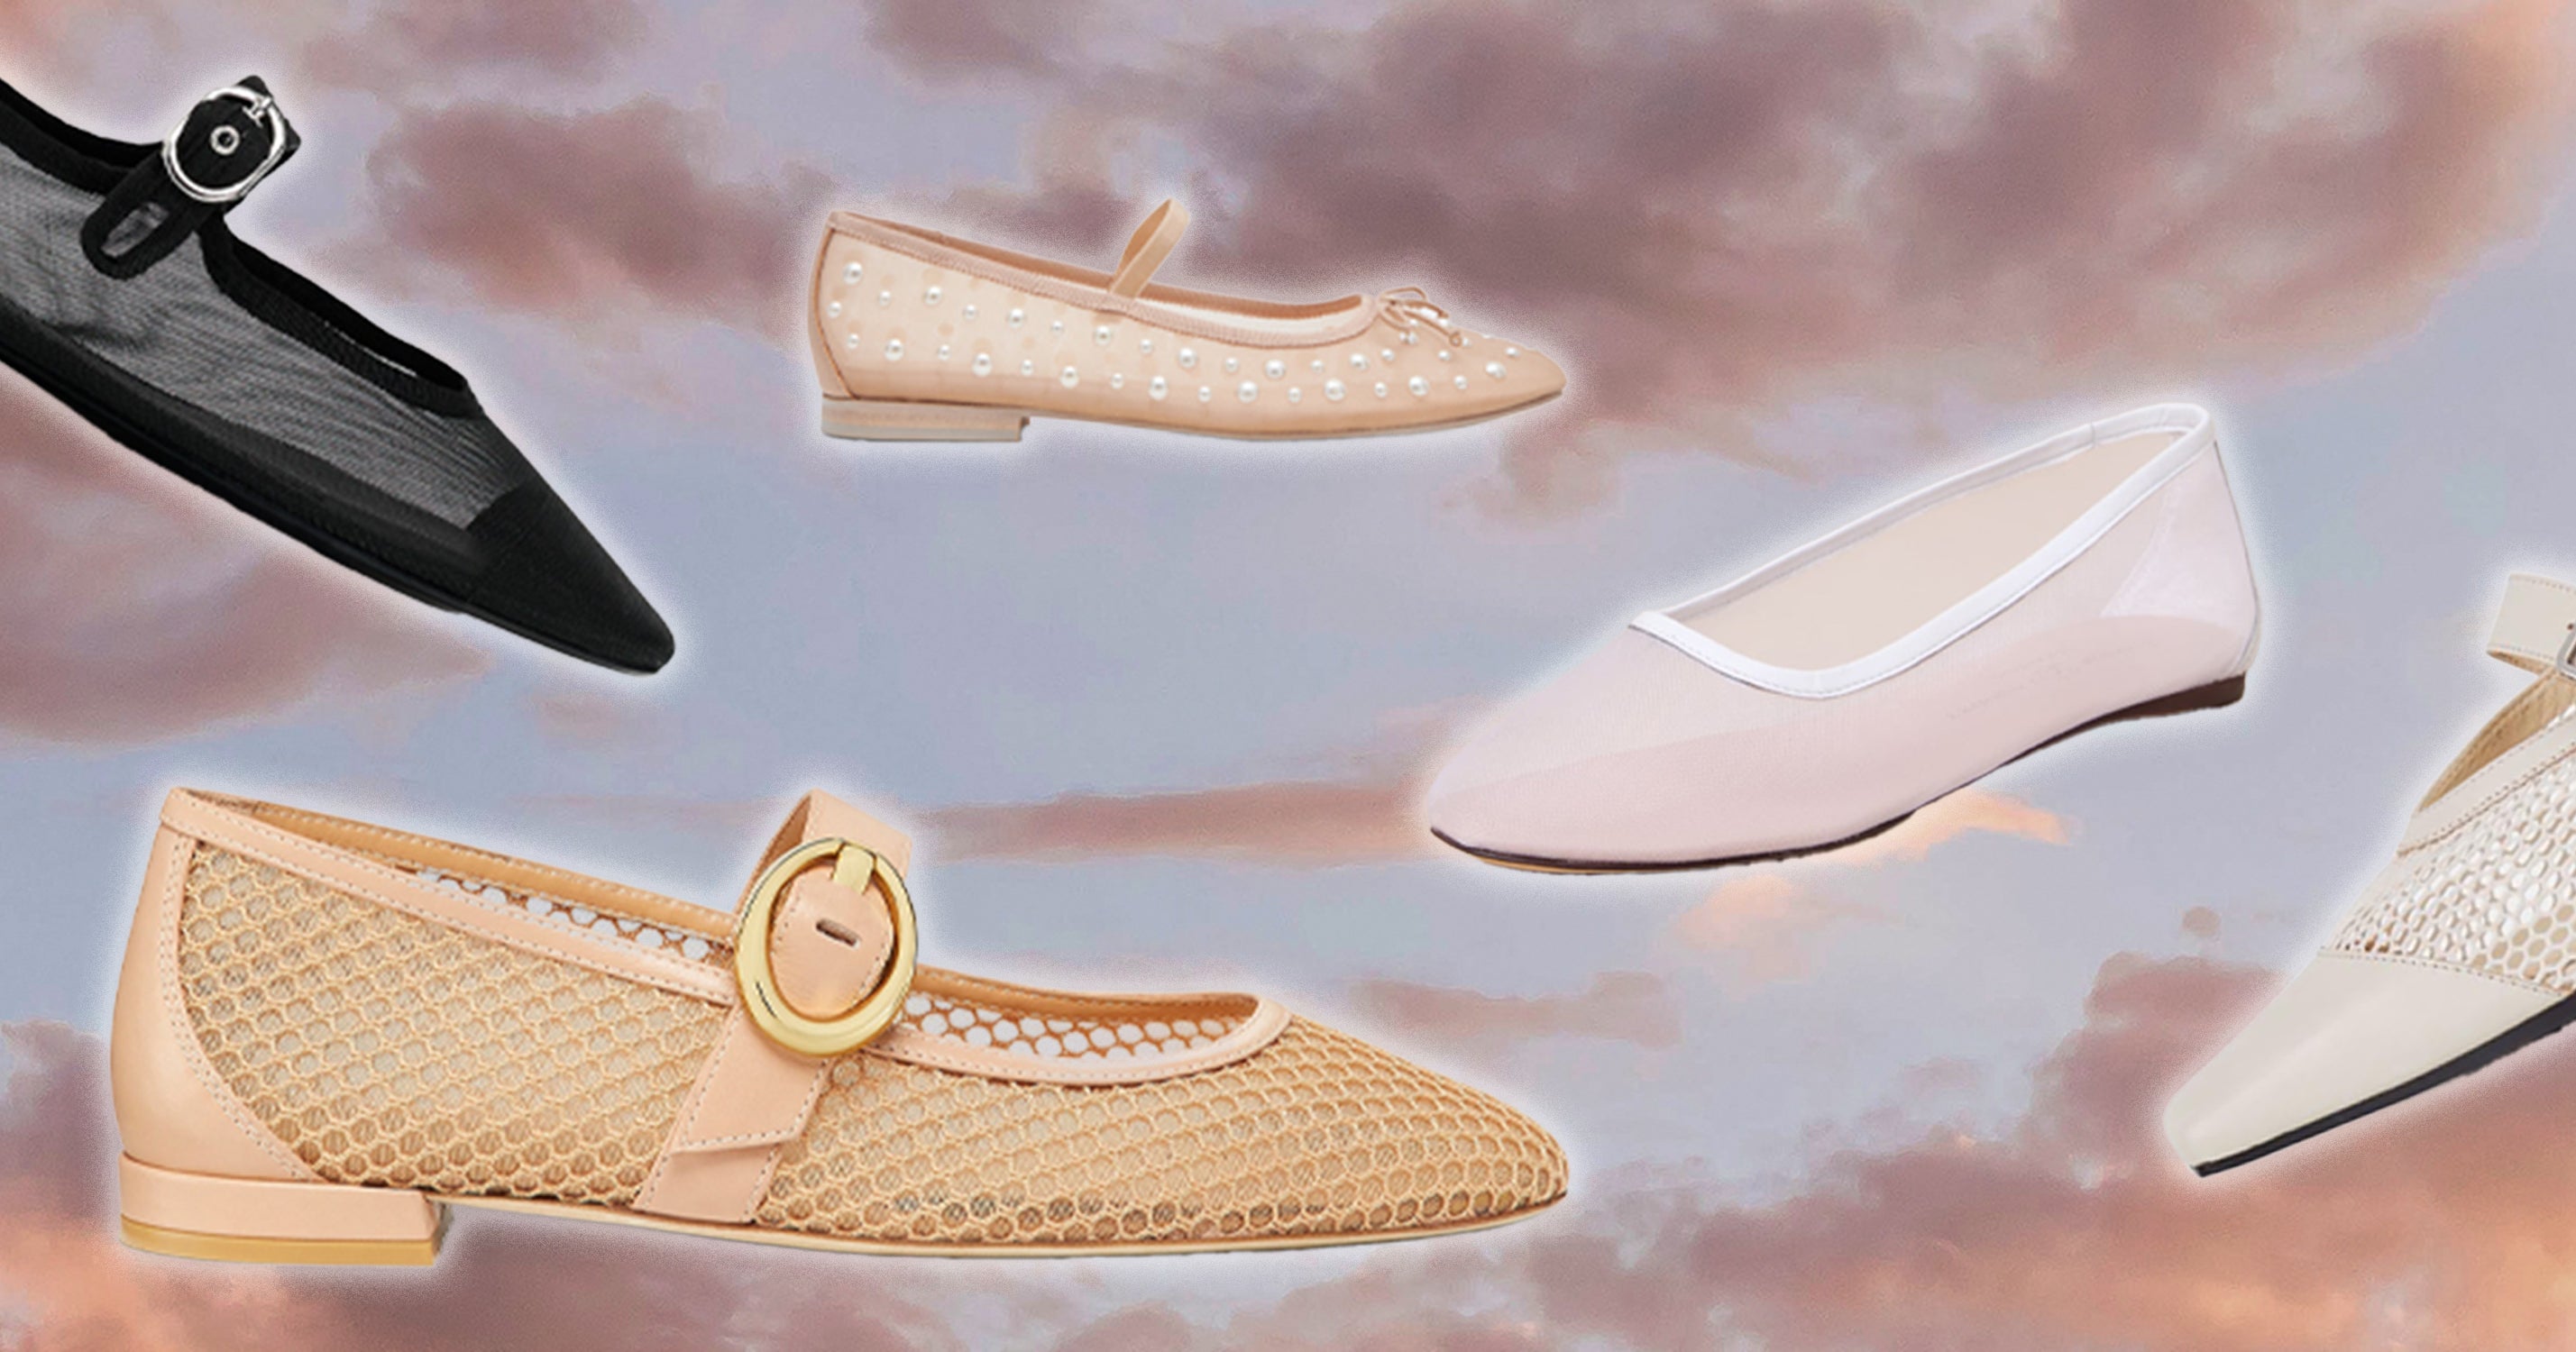 Mesh Ballet Flats Are The Shoe Trend Of The Summer